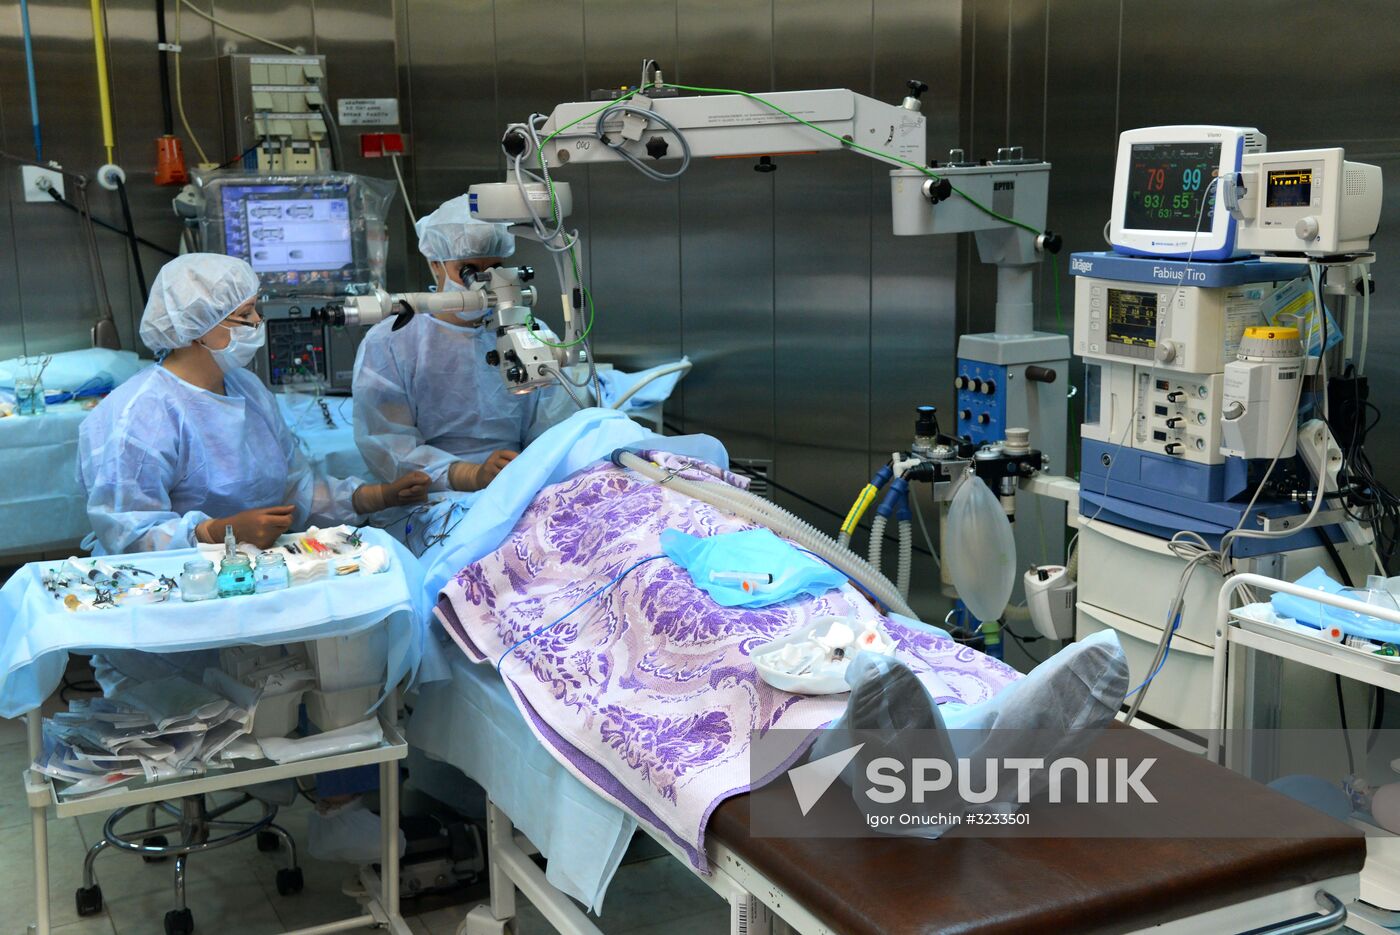 Eye Microsurgery Federal State Institution in Khabarovsk